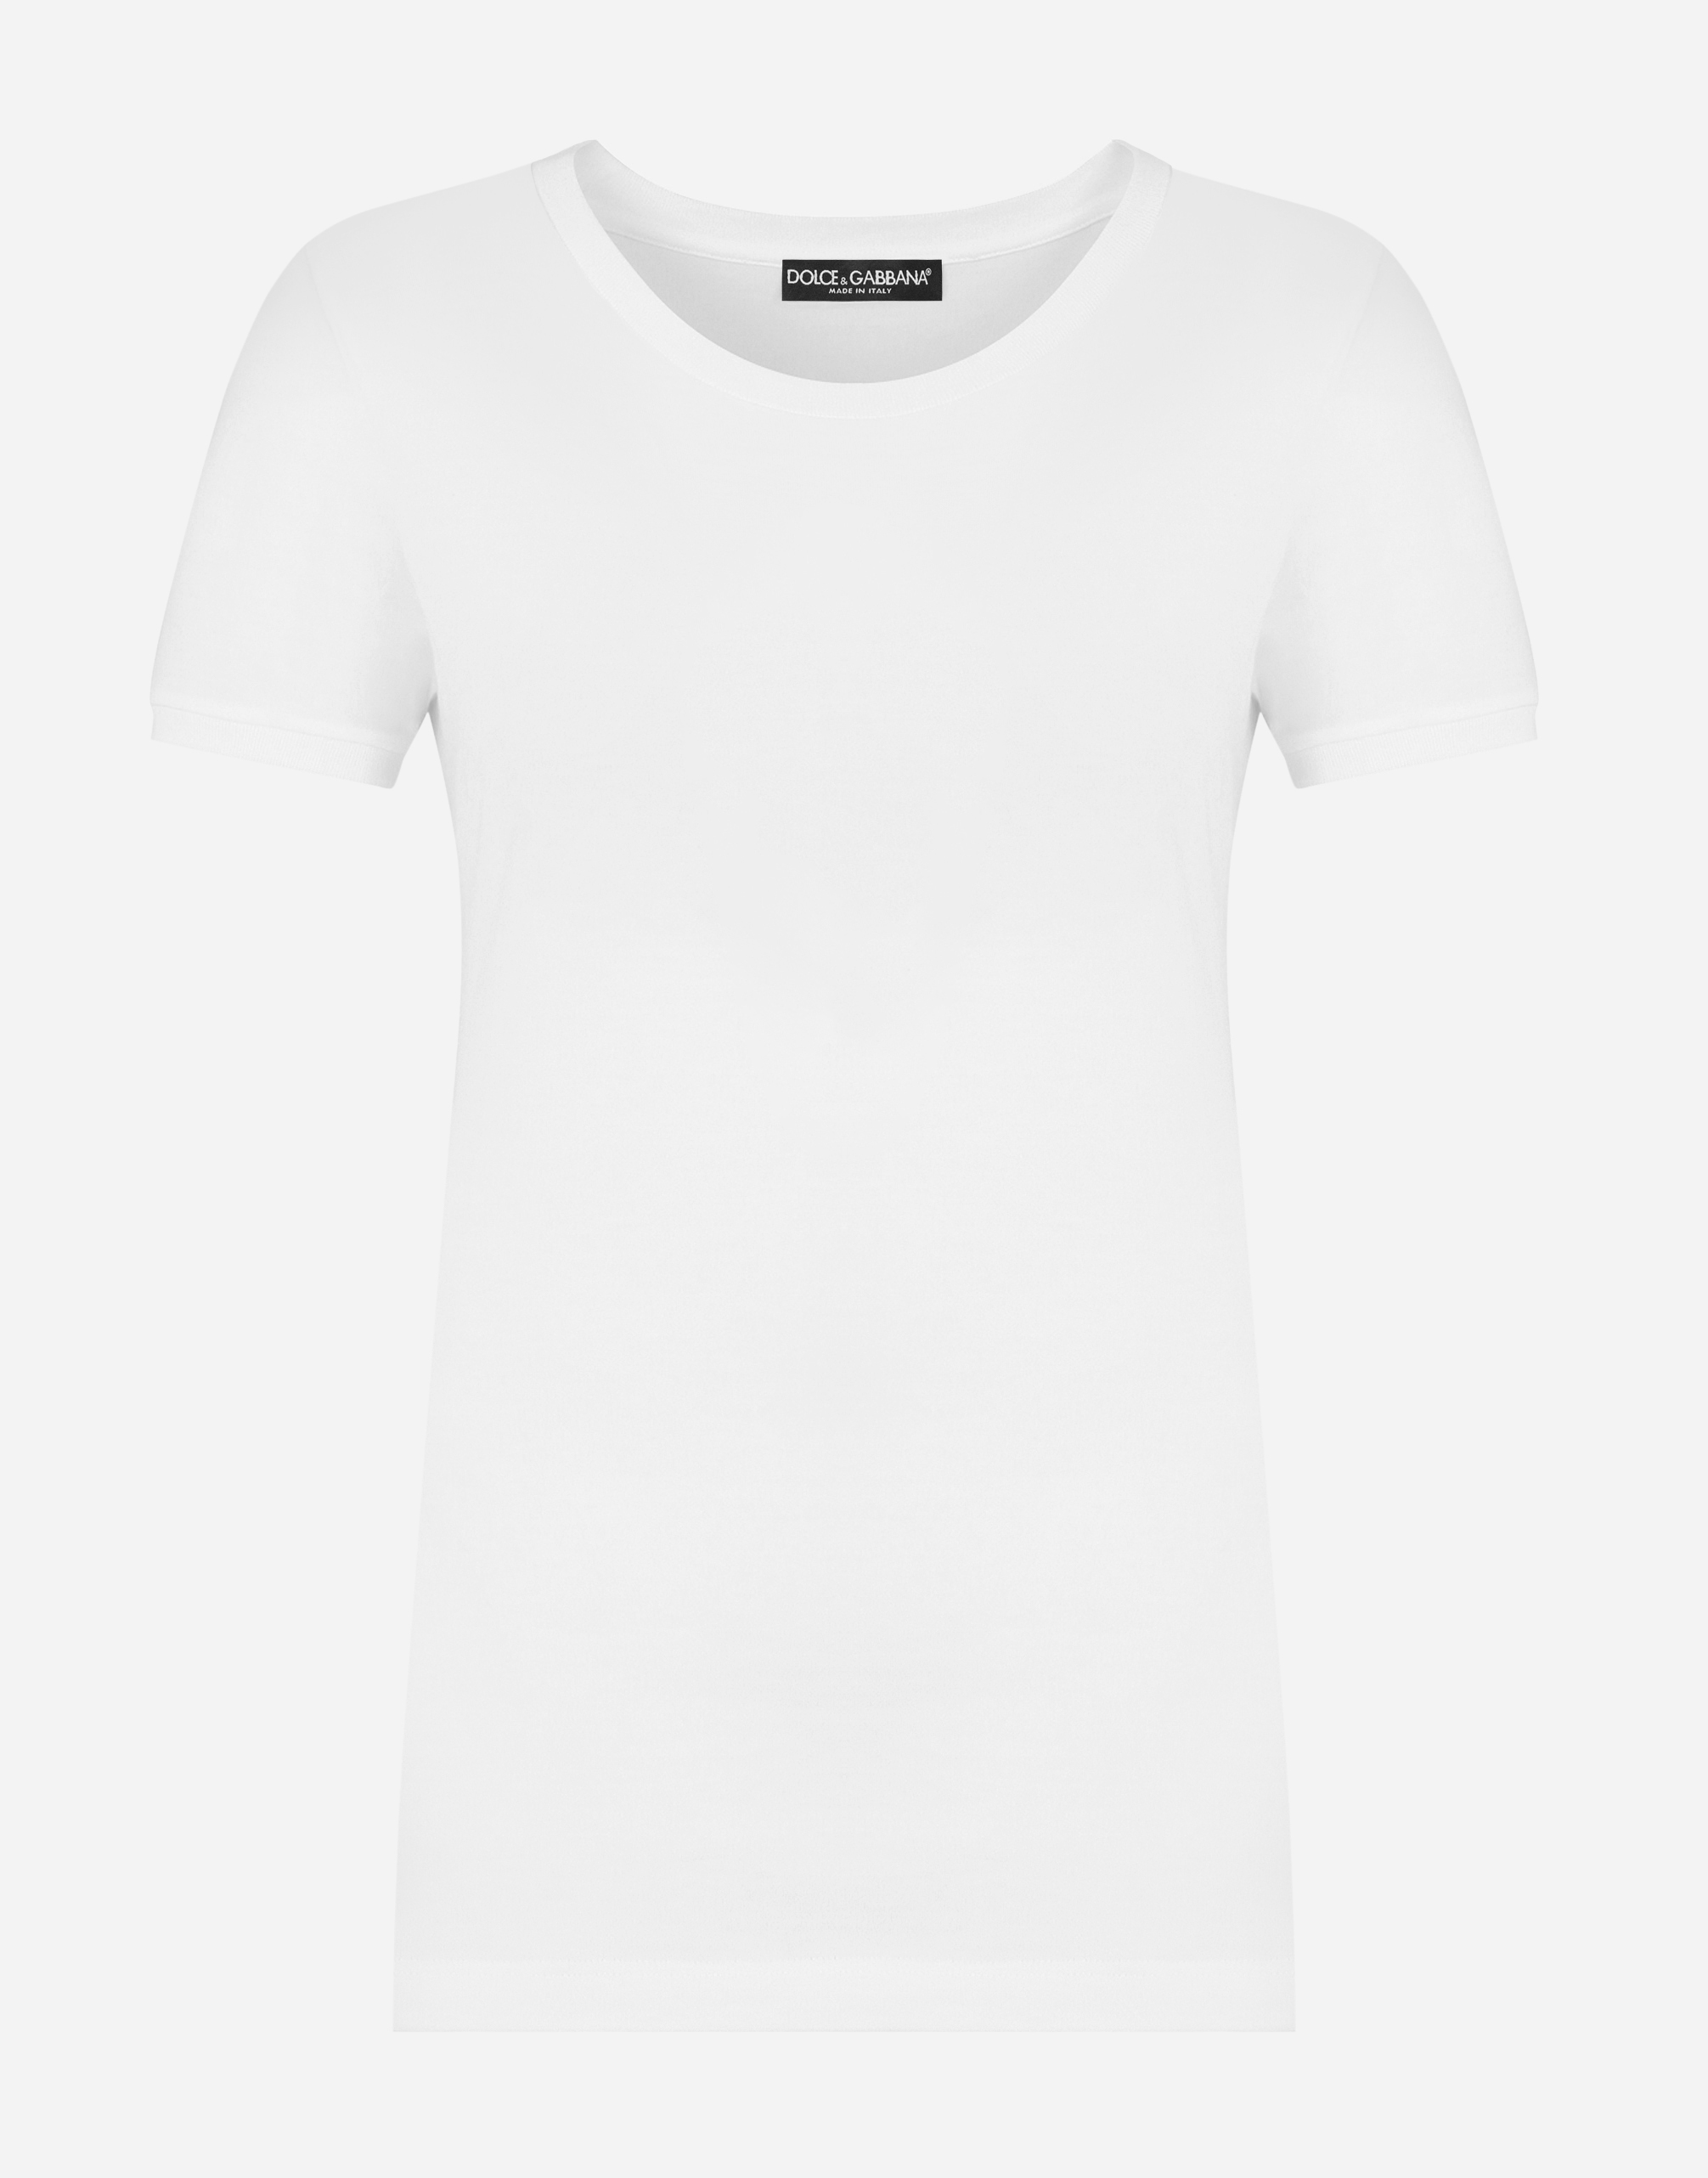 Short-sleeved jersey t-shirt in White